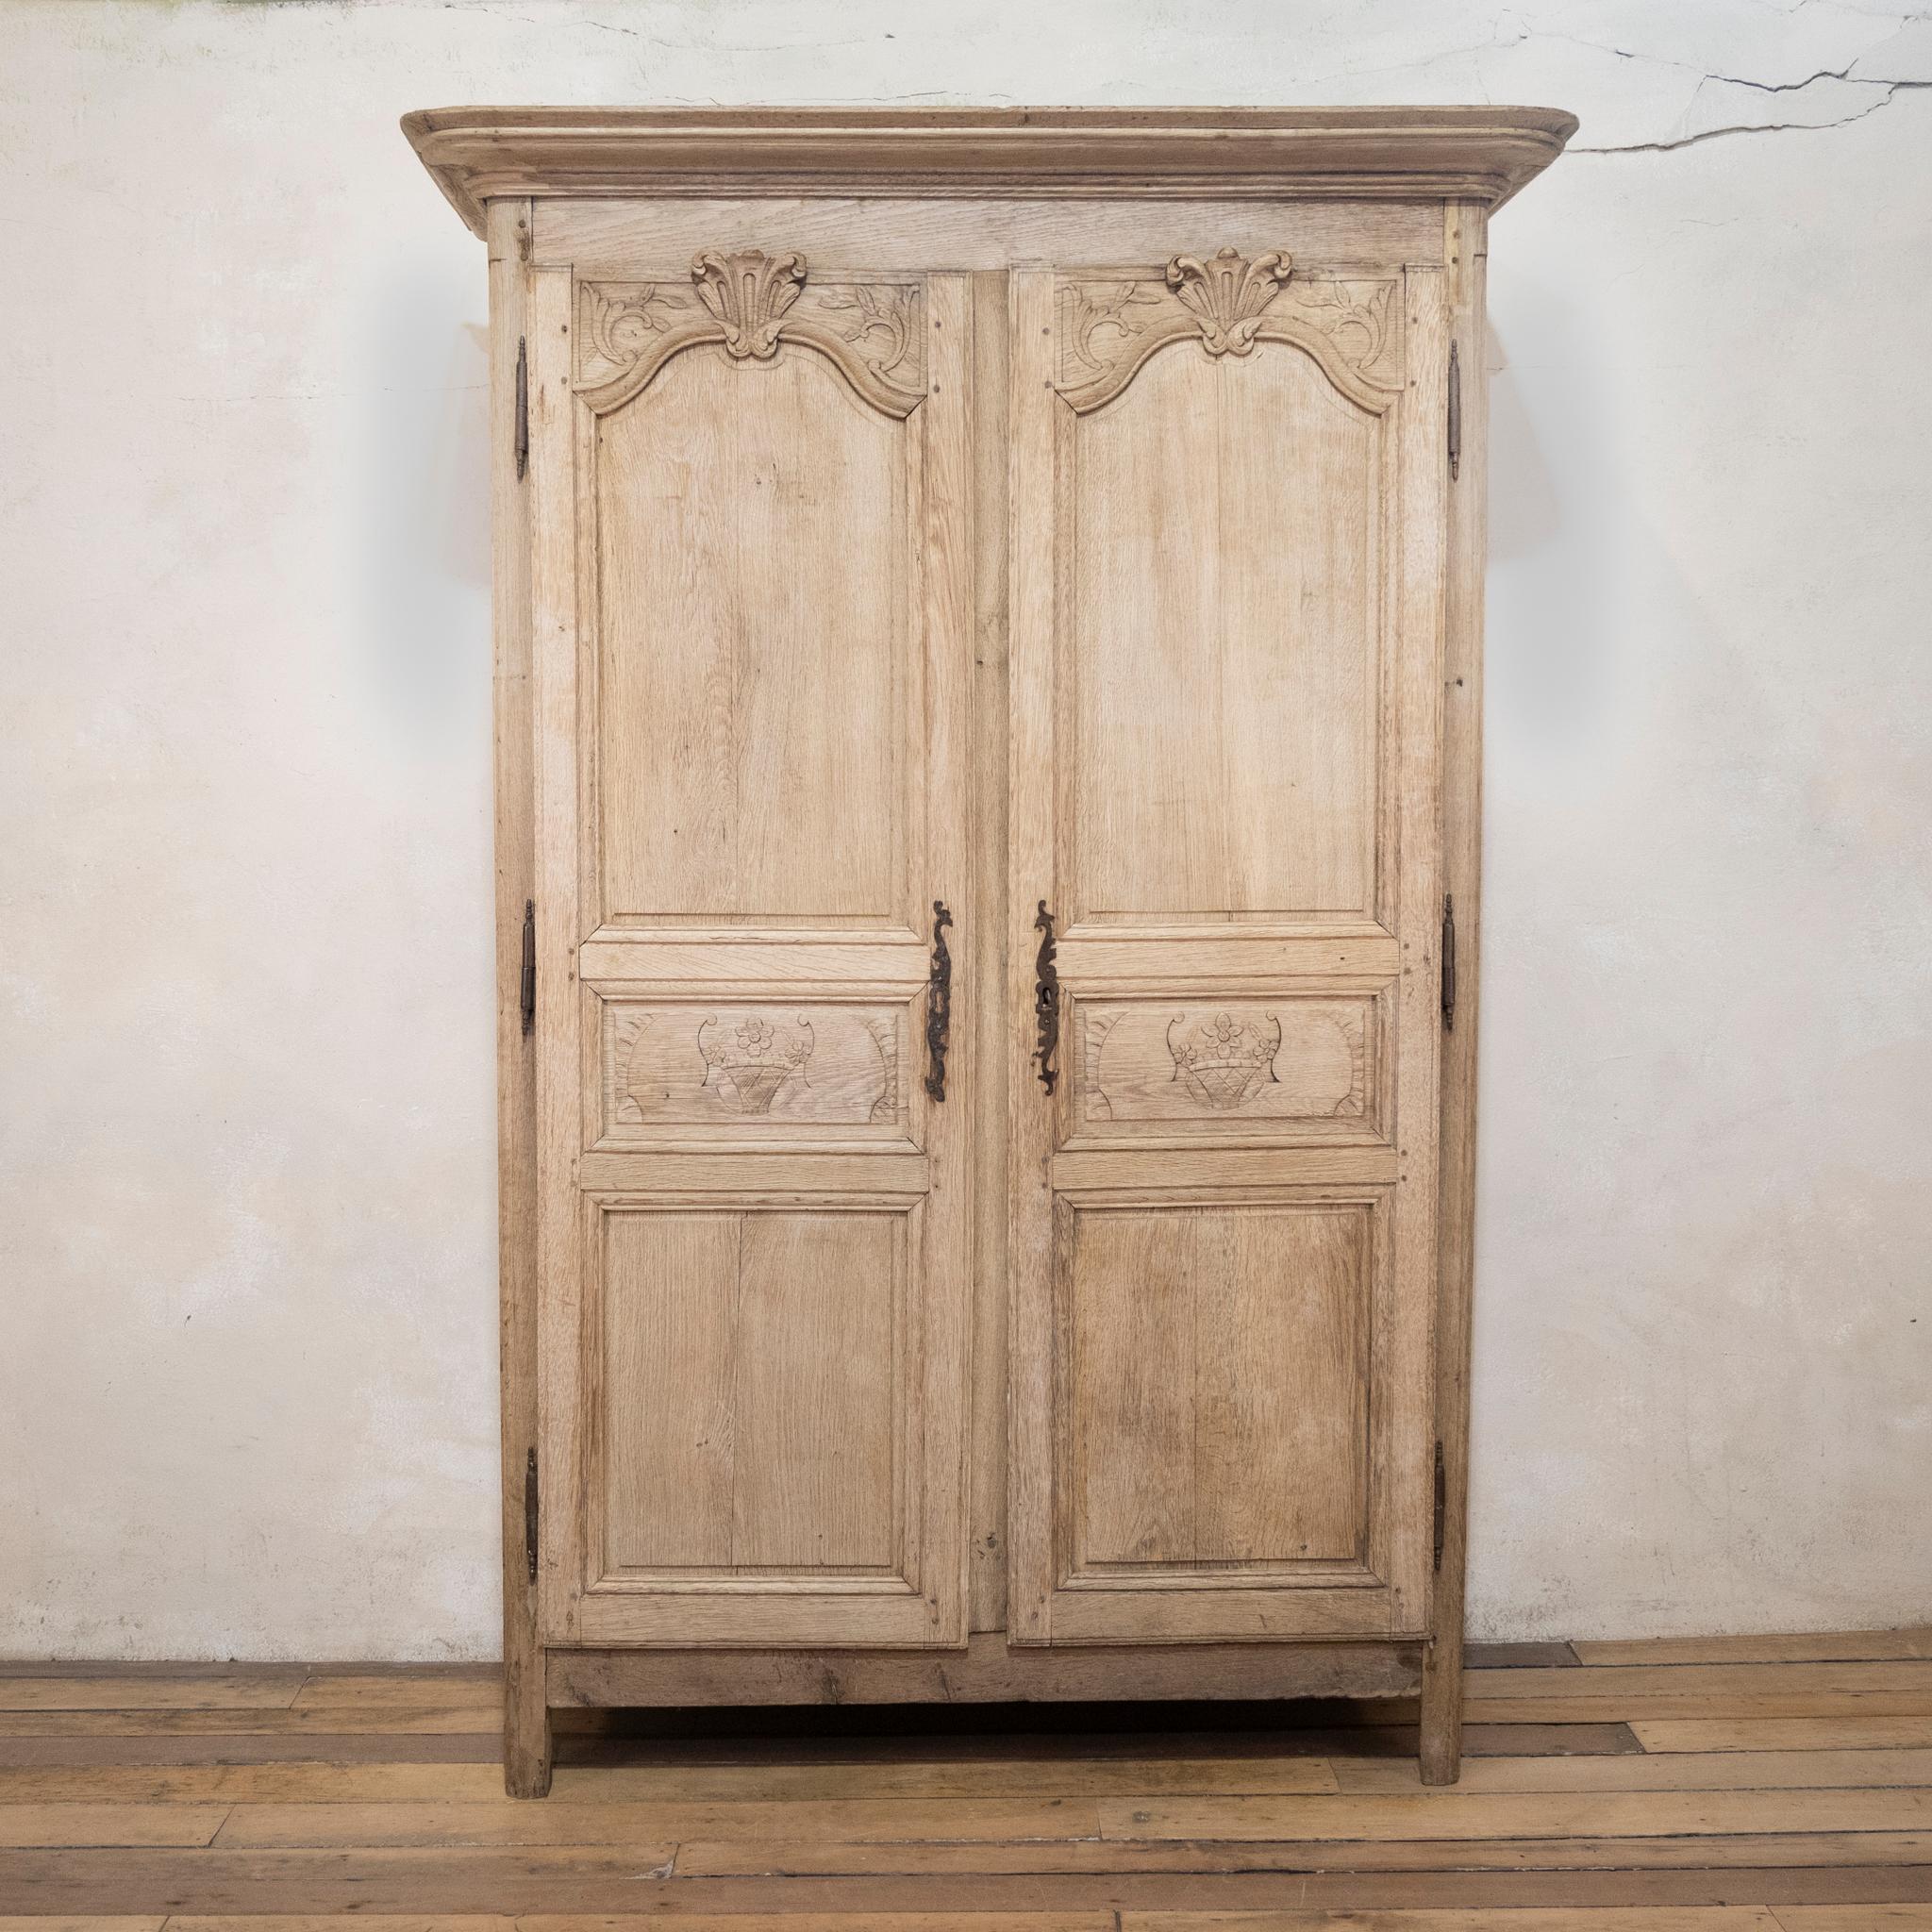 An elegant 19th-century French washed oak Normandy marriage armoire. Displaying an overhanging moulded cornice above a pair of panelled doors. Featuring floral and foliate carvings. Raised on simplistic straight feet. The interior reveals three